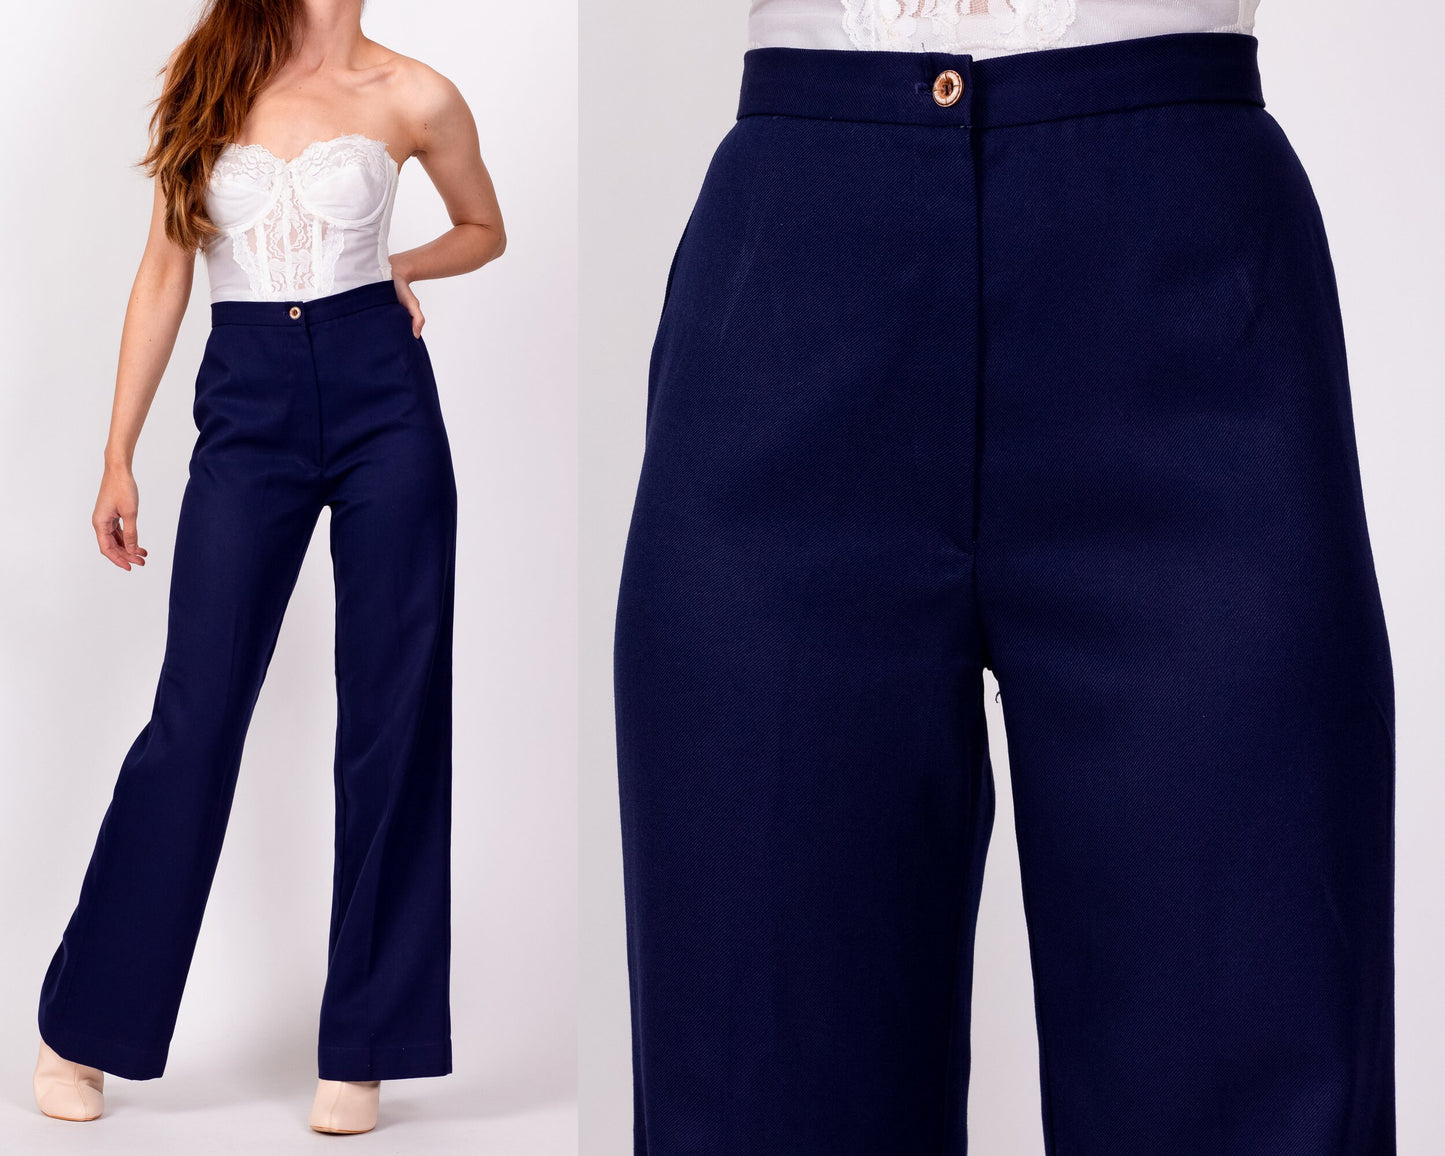 70s Navy Blue High Waisted Pants - Extra Small, 24" 